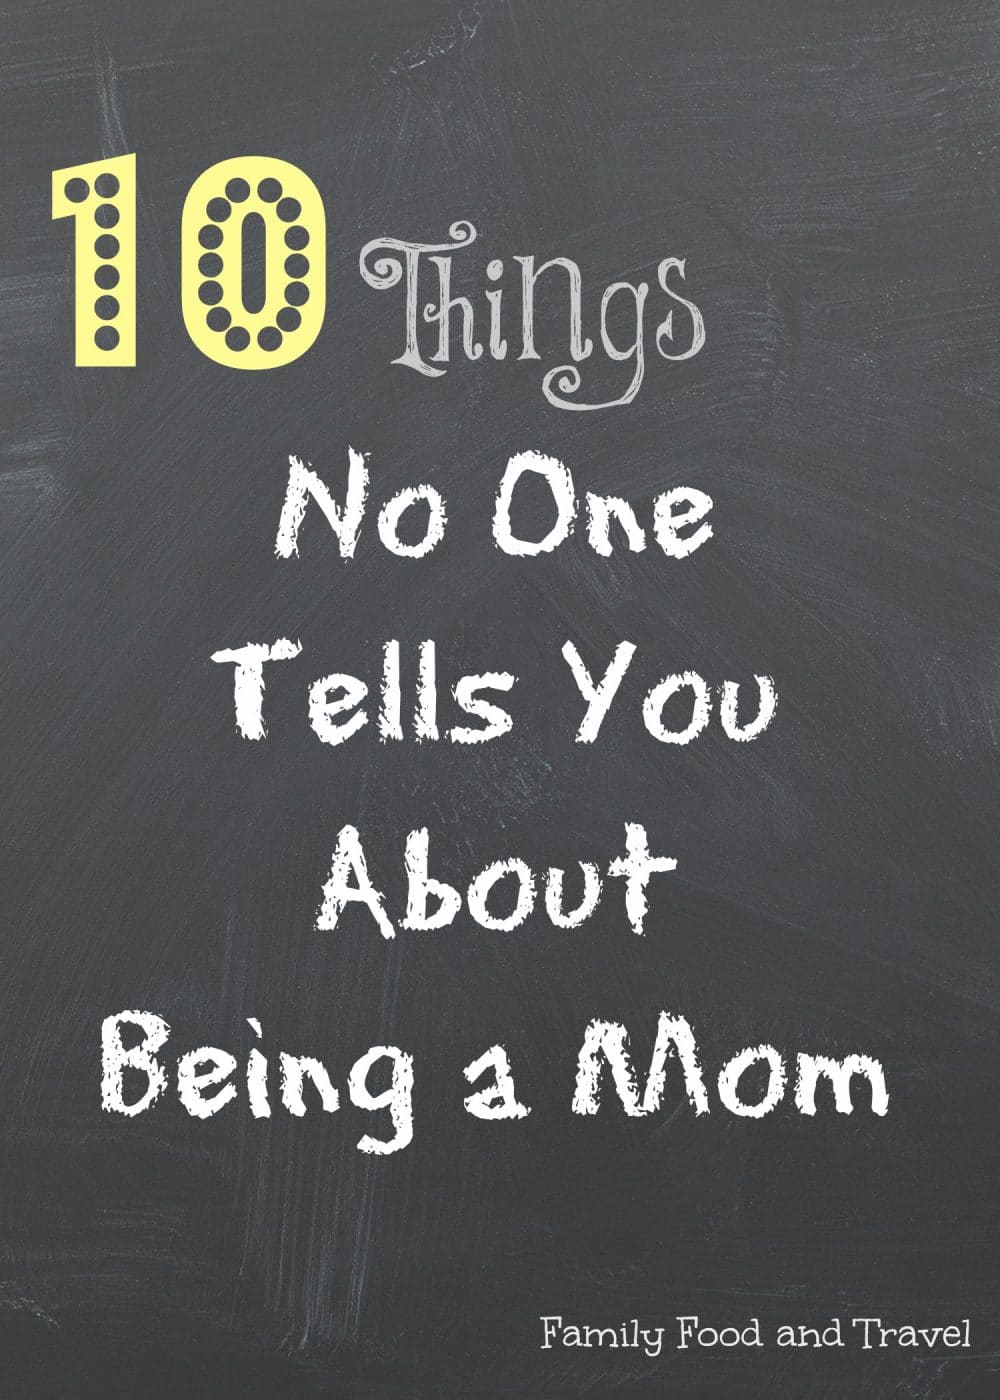 10 things no one tells you about being a mom